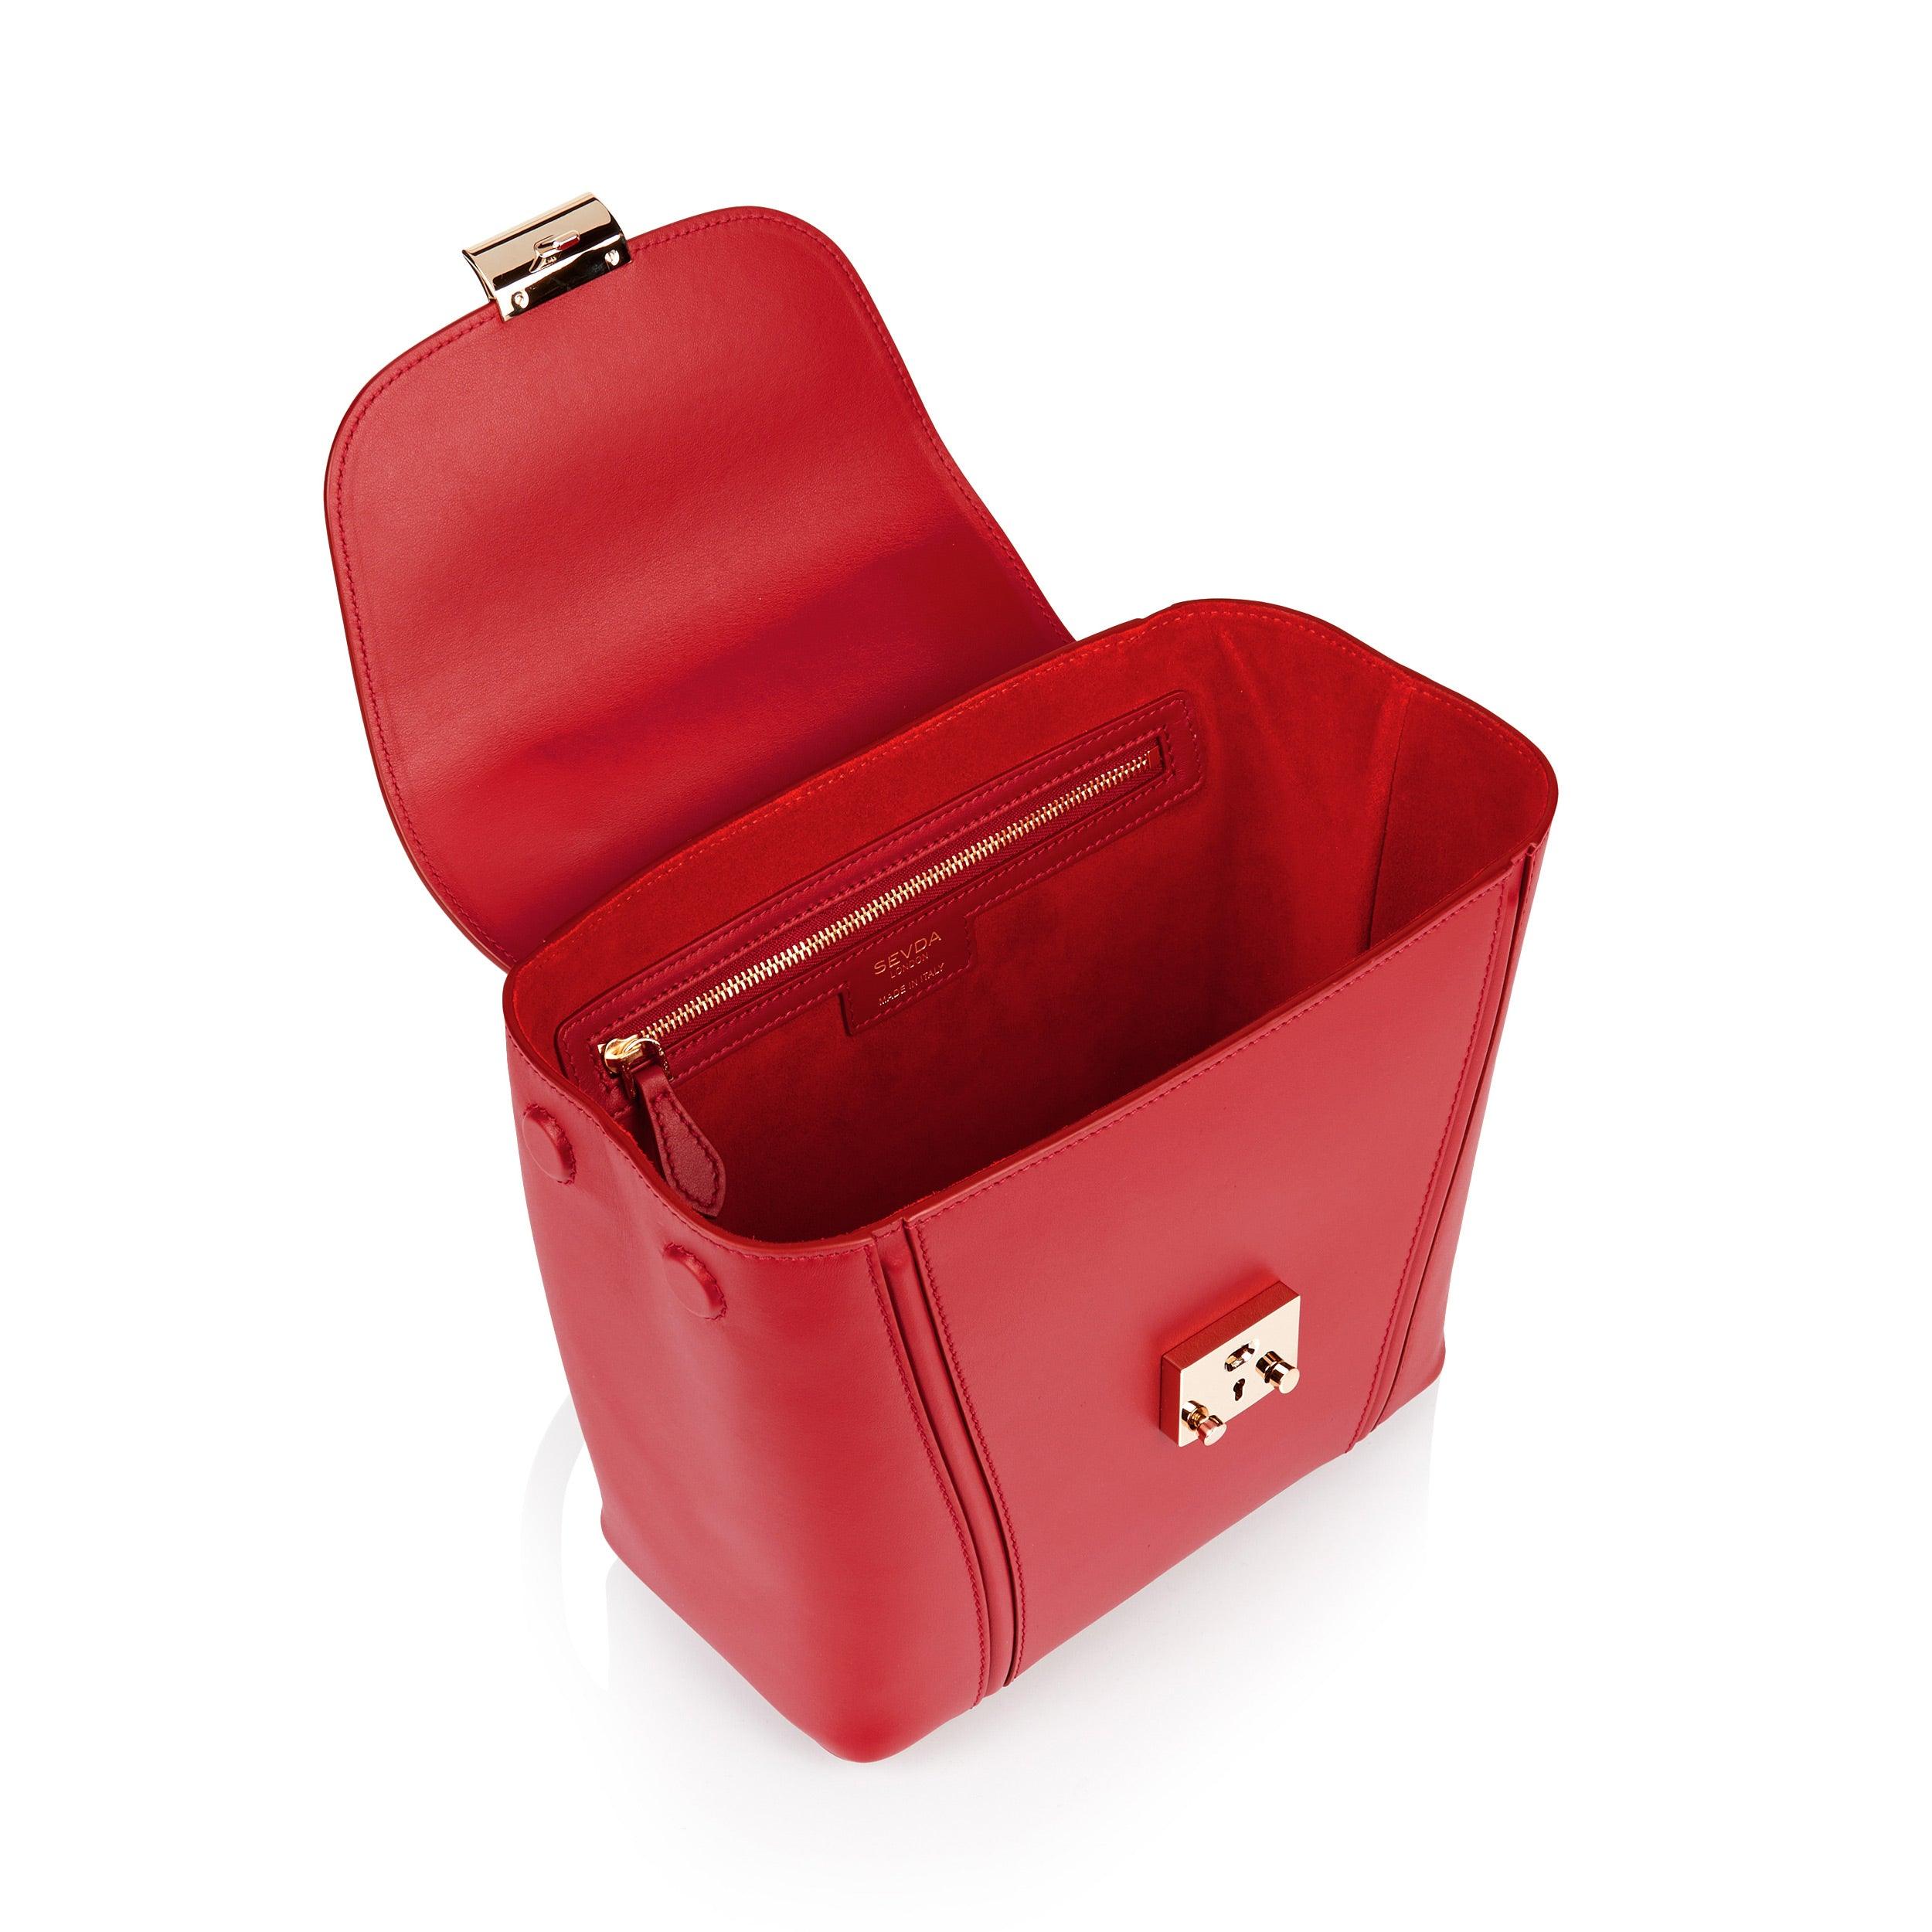 Red Small Top Handle Designer Bag - A fusion of London design and Italian craftsmanship.